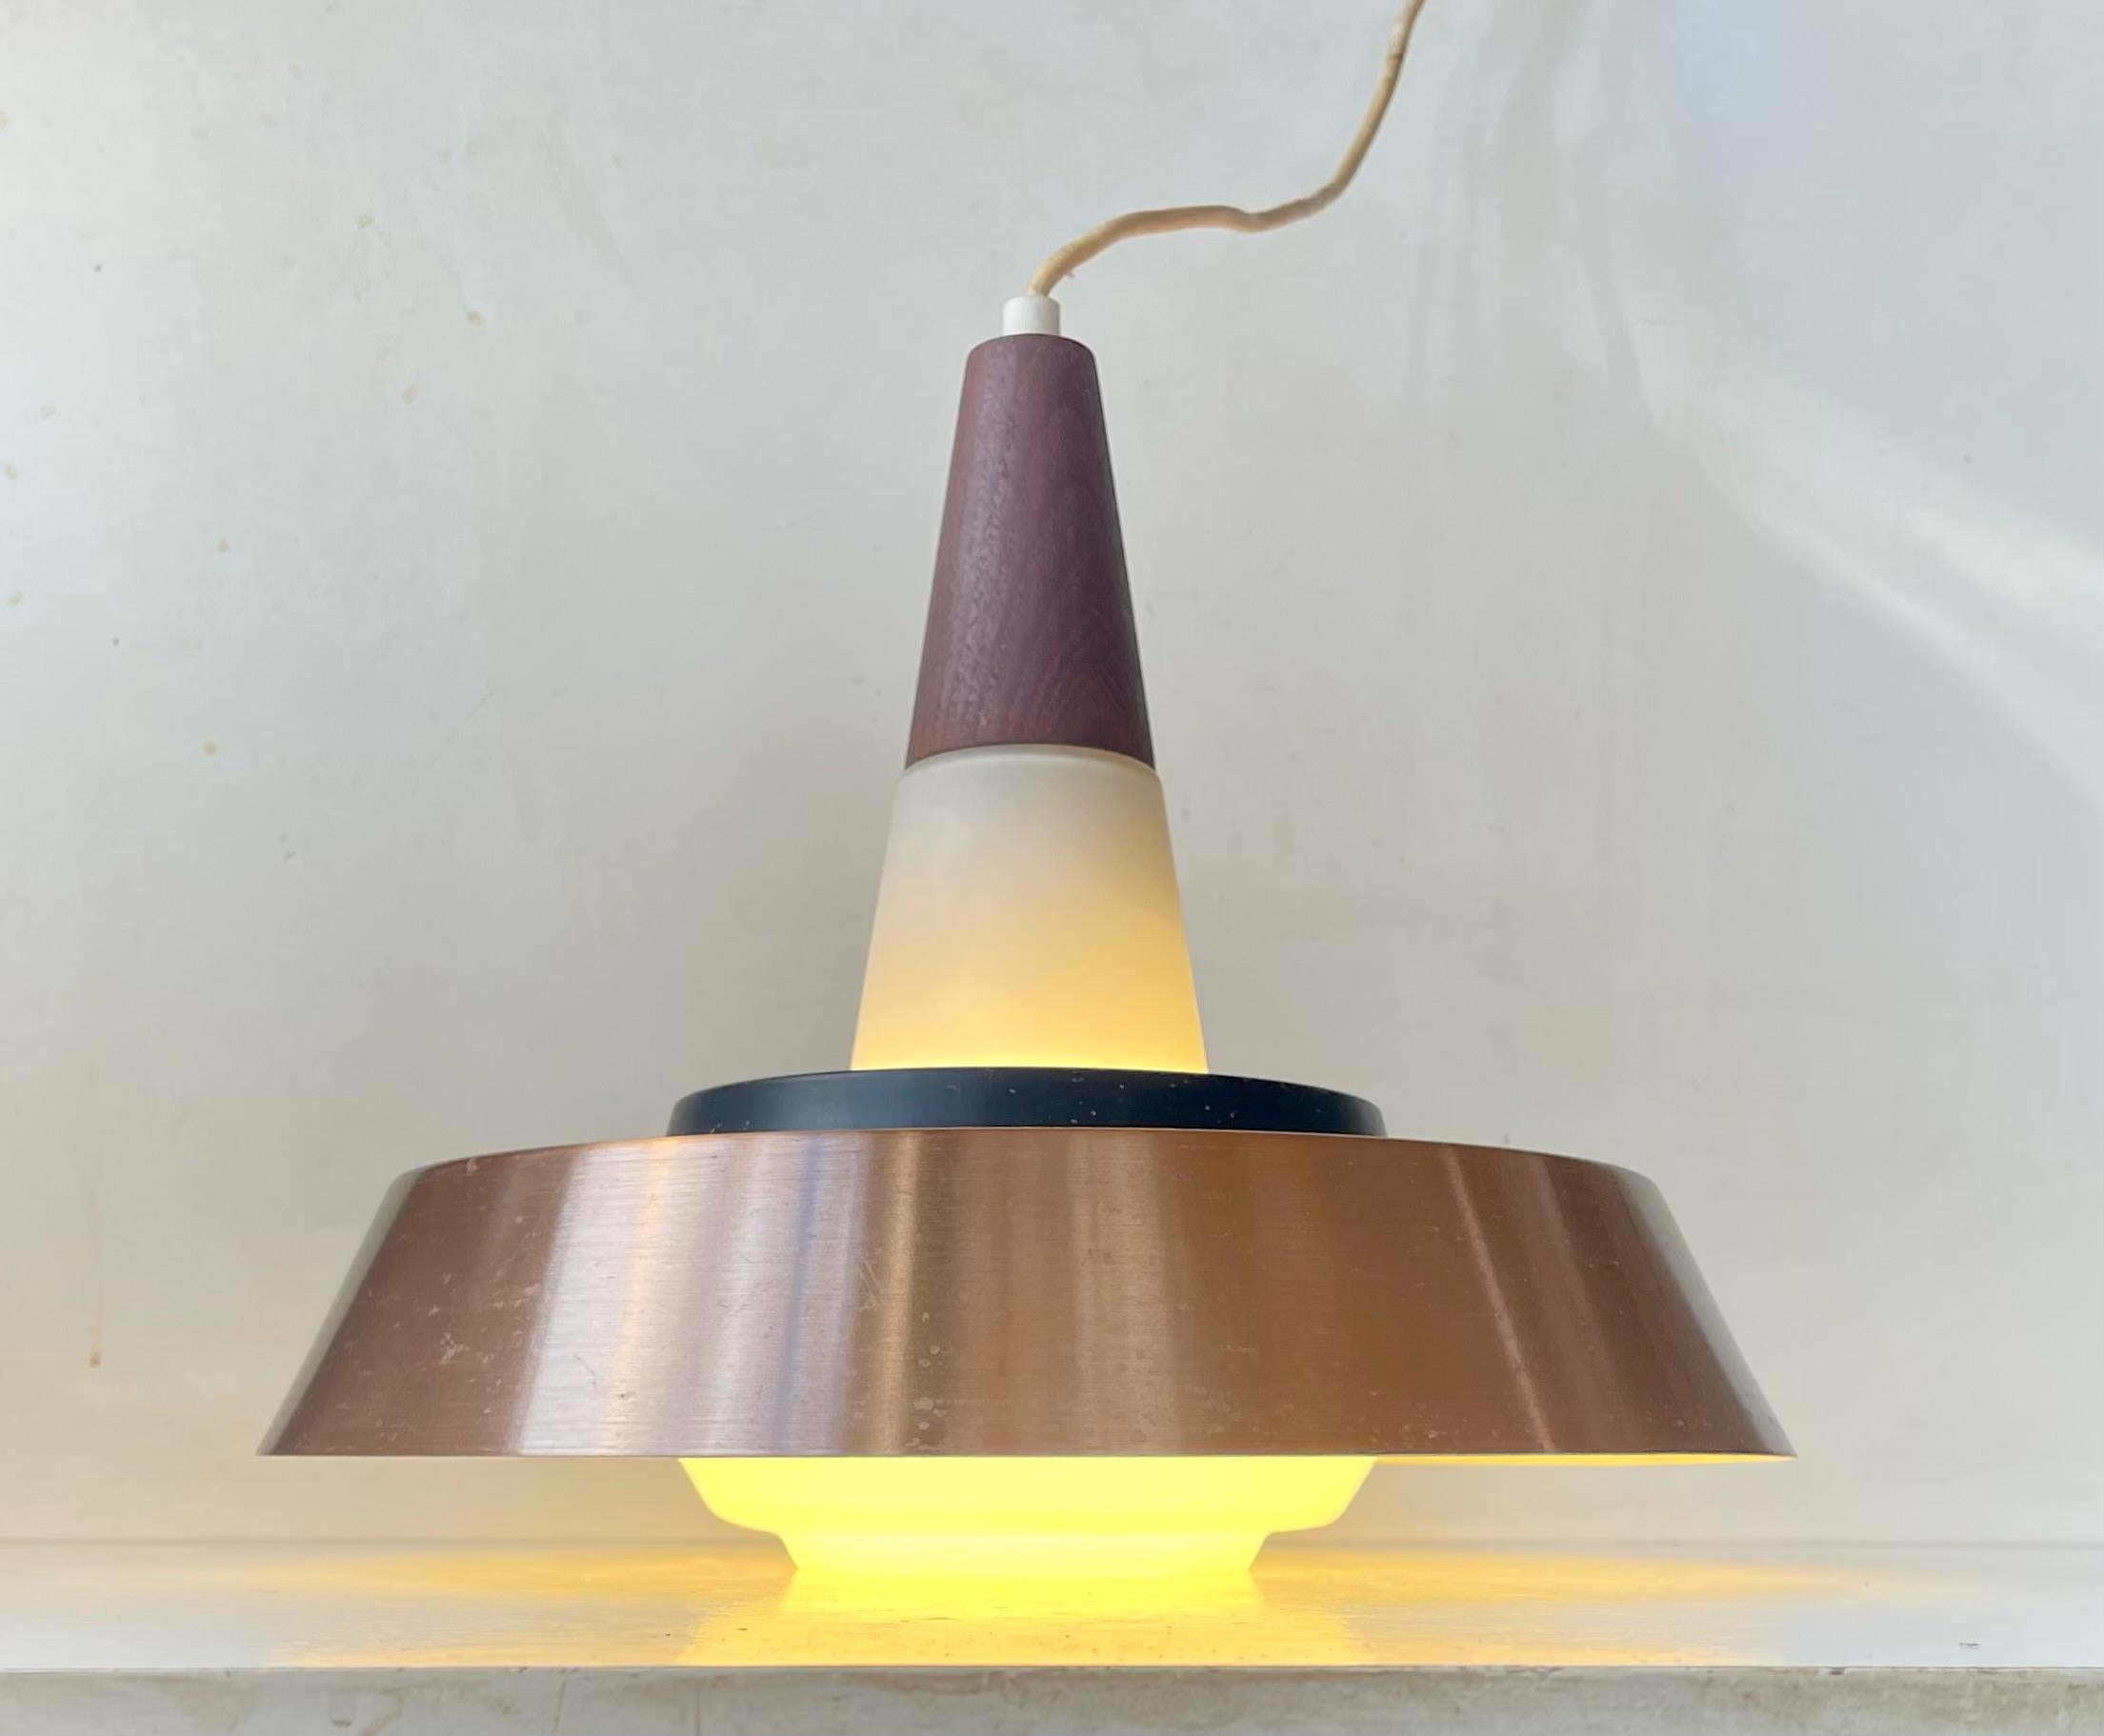 Elegant ballerina shaped ceiling lamp. Its made from hand-blown opaline glass from Holmegaard set with a large copper alloy shade and a smaller contrasting black one. The top is made from solid engine-turned teak. Designed by Ernest Voss in the 50s